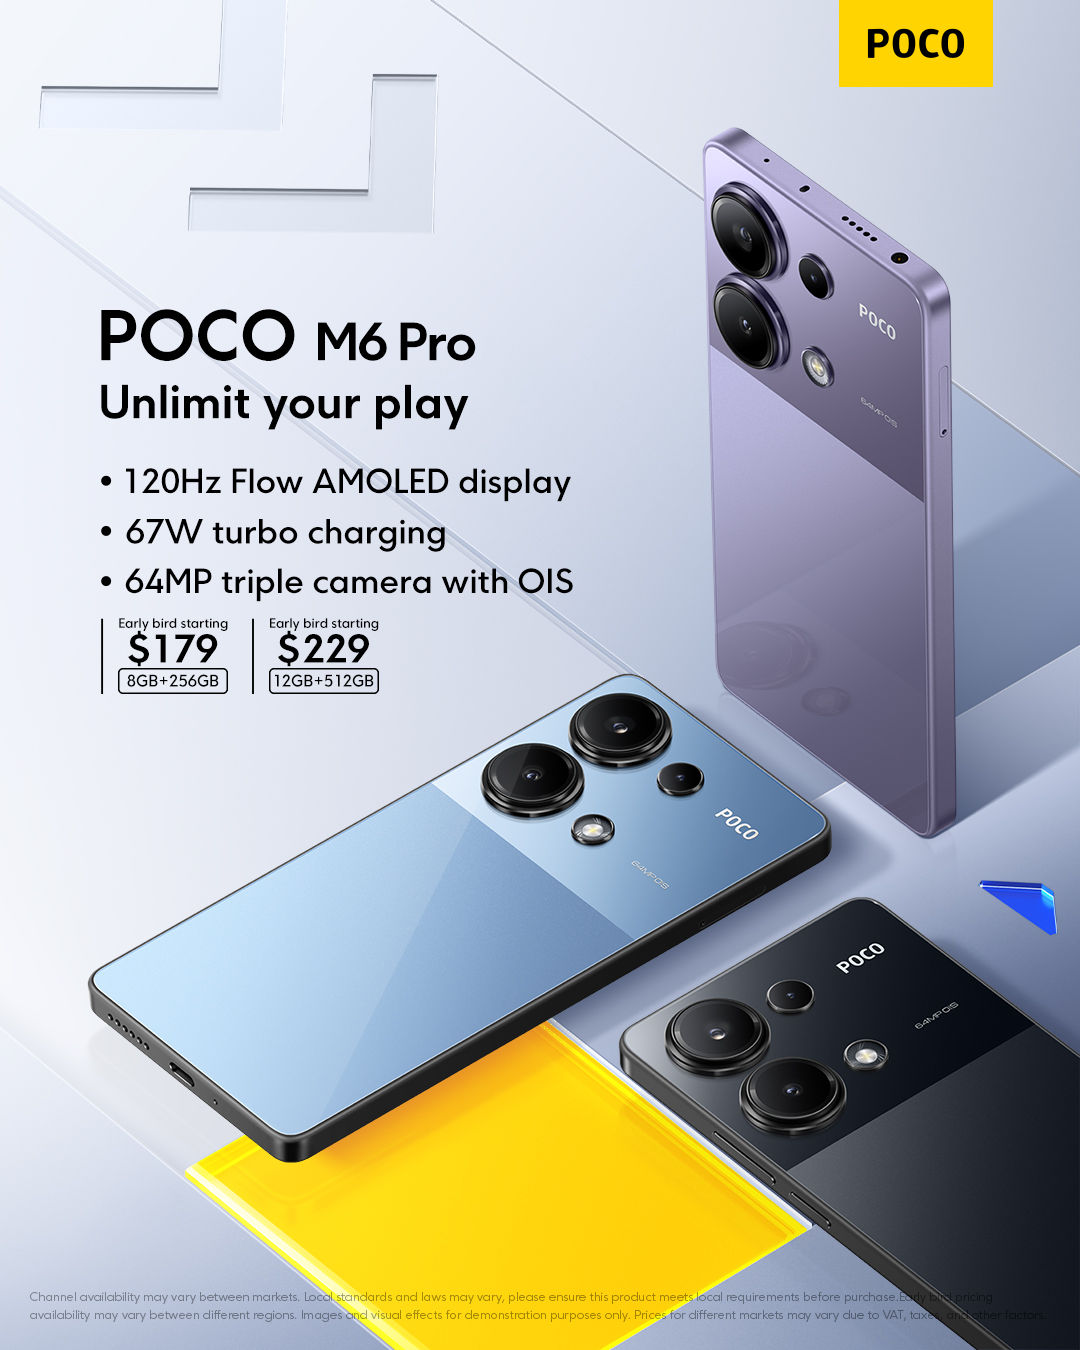 Poco M6 Pro 4G Global Launch Date Set for January 11; Price, Specifications  Leaked Via Online Listing